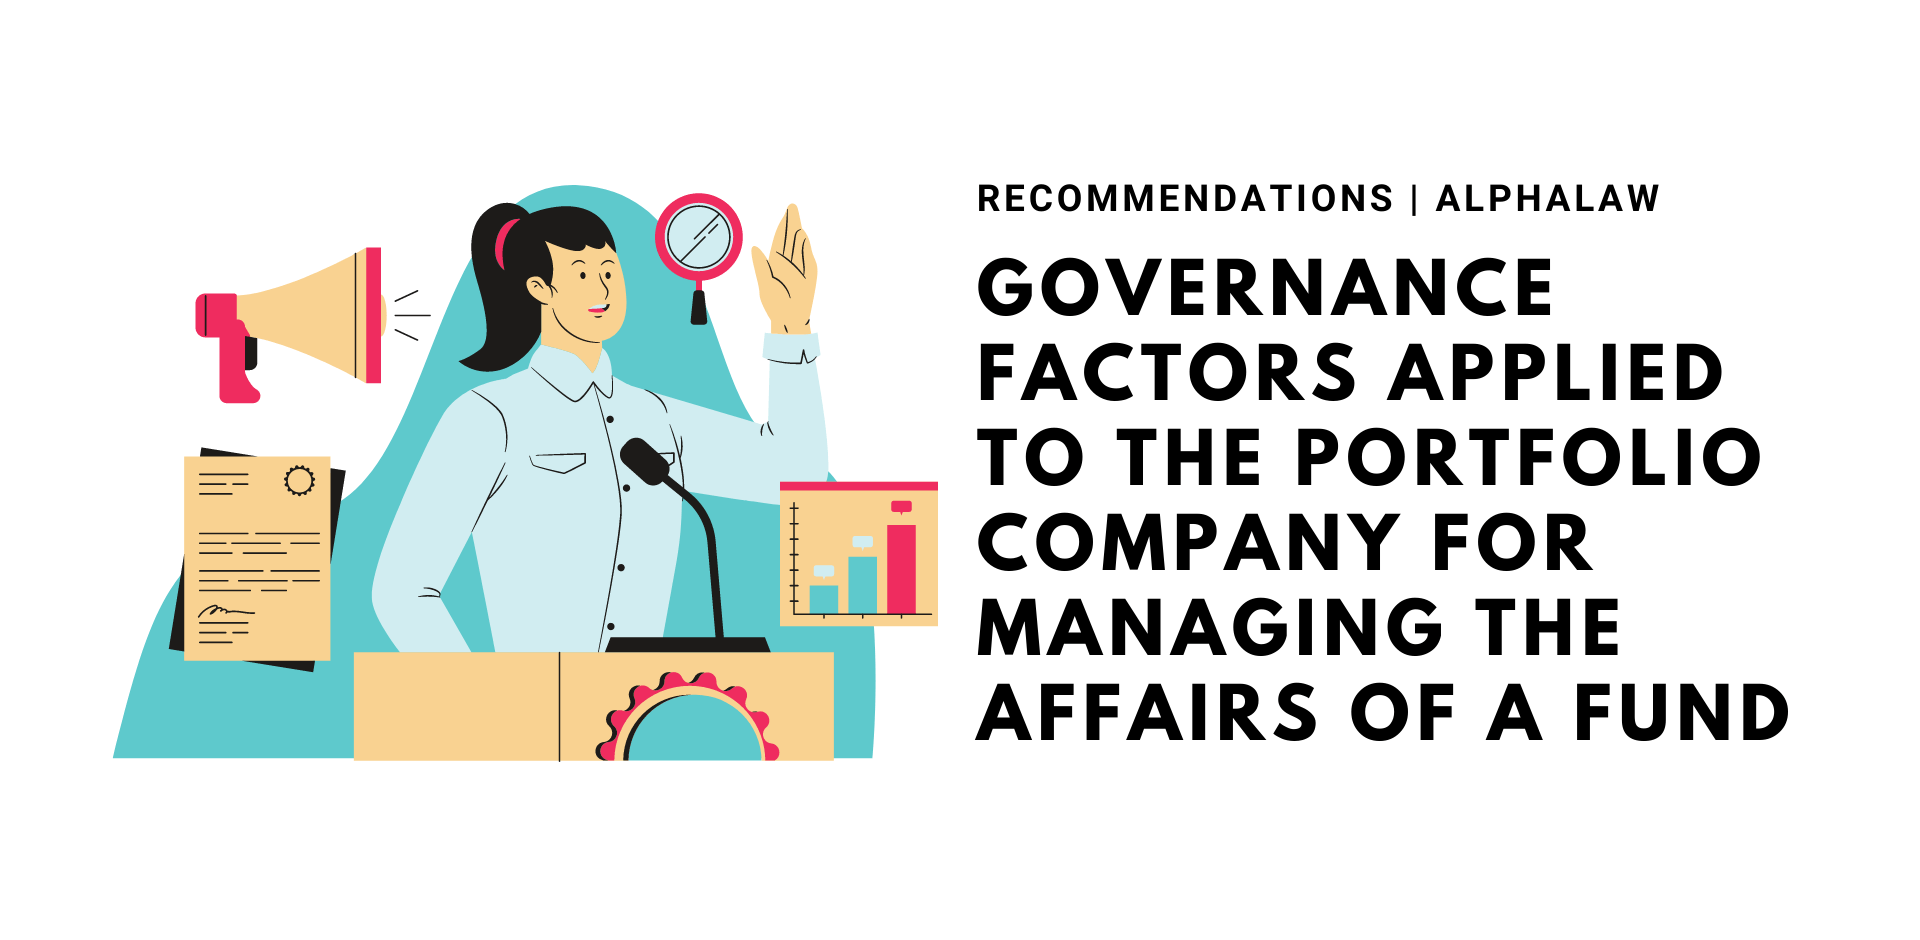 Governance Factors Applied to the Portfolio Company for Managing the Affairs of a Fund